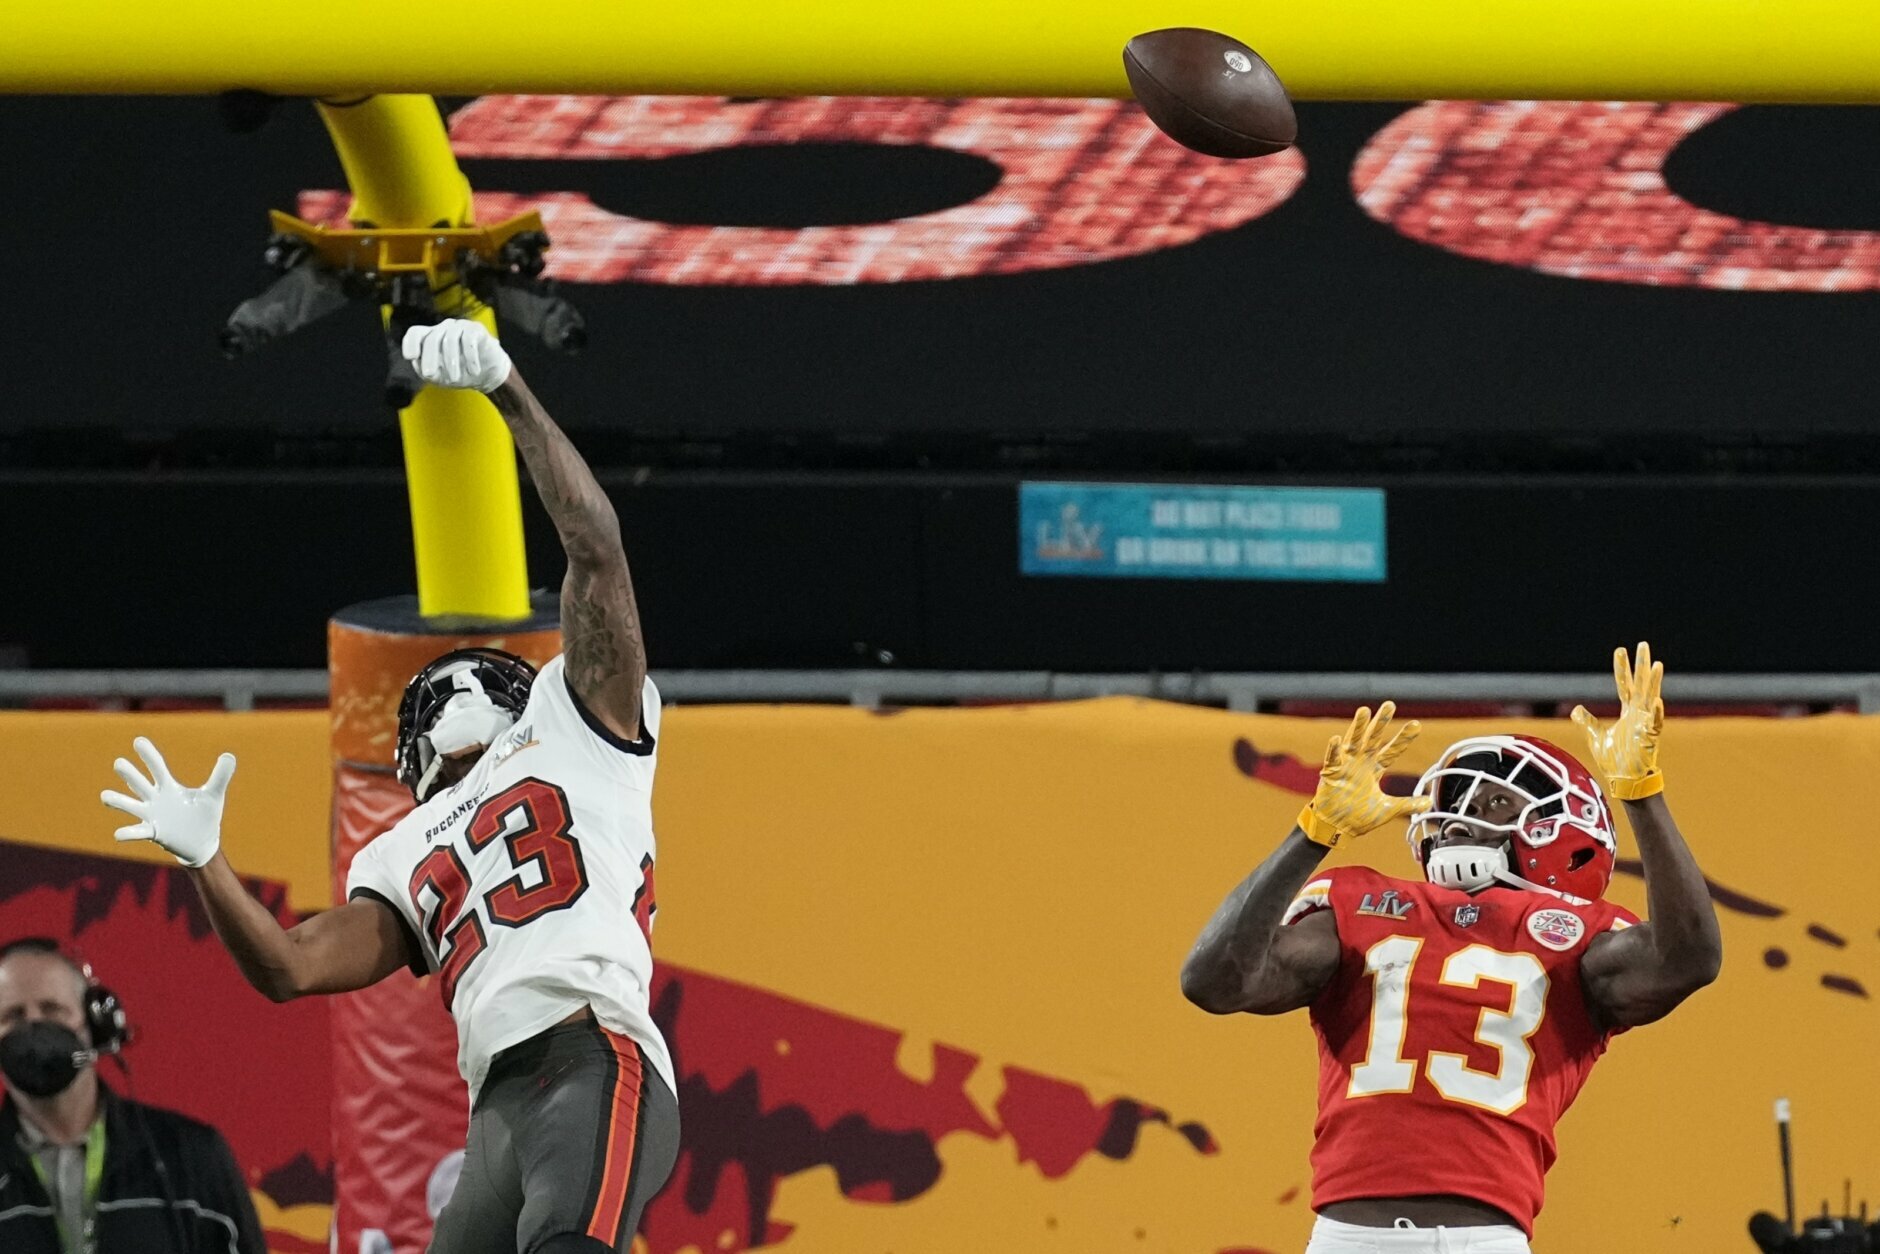 Tampa Bay Buccaneers cornerback Sean Murphy-Bunting breaks up a pass intended for Kansas City Chiefs wide receiver Byron Pringle during the first half of the NFL Super Bowl 55 football game Sunday, Feb. 7, 2021, in Tampa, Fla. (AP Photo/David J. Phillip)